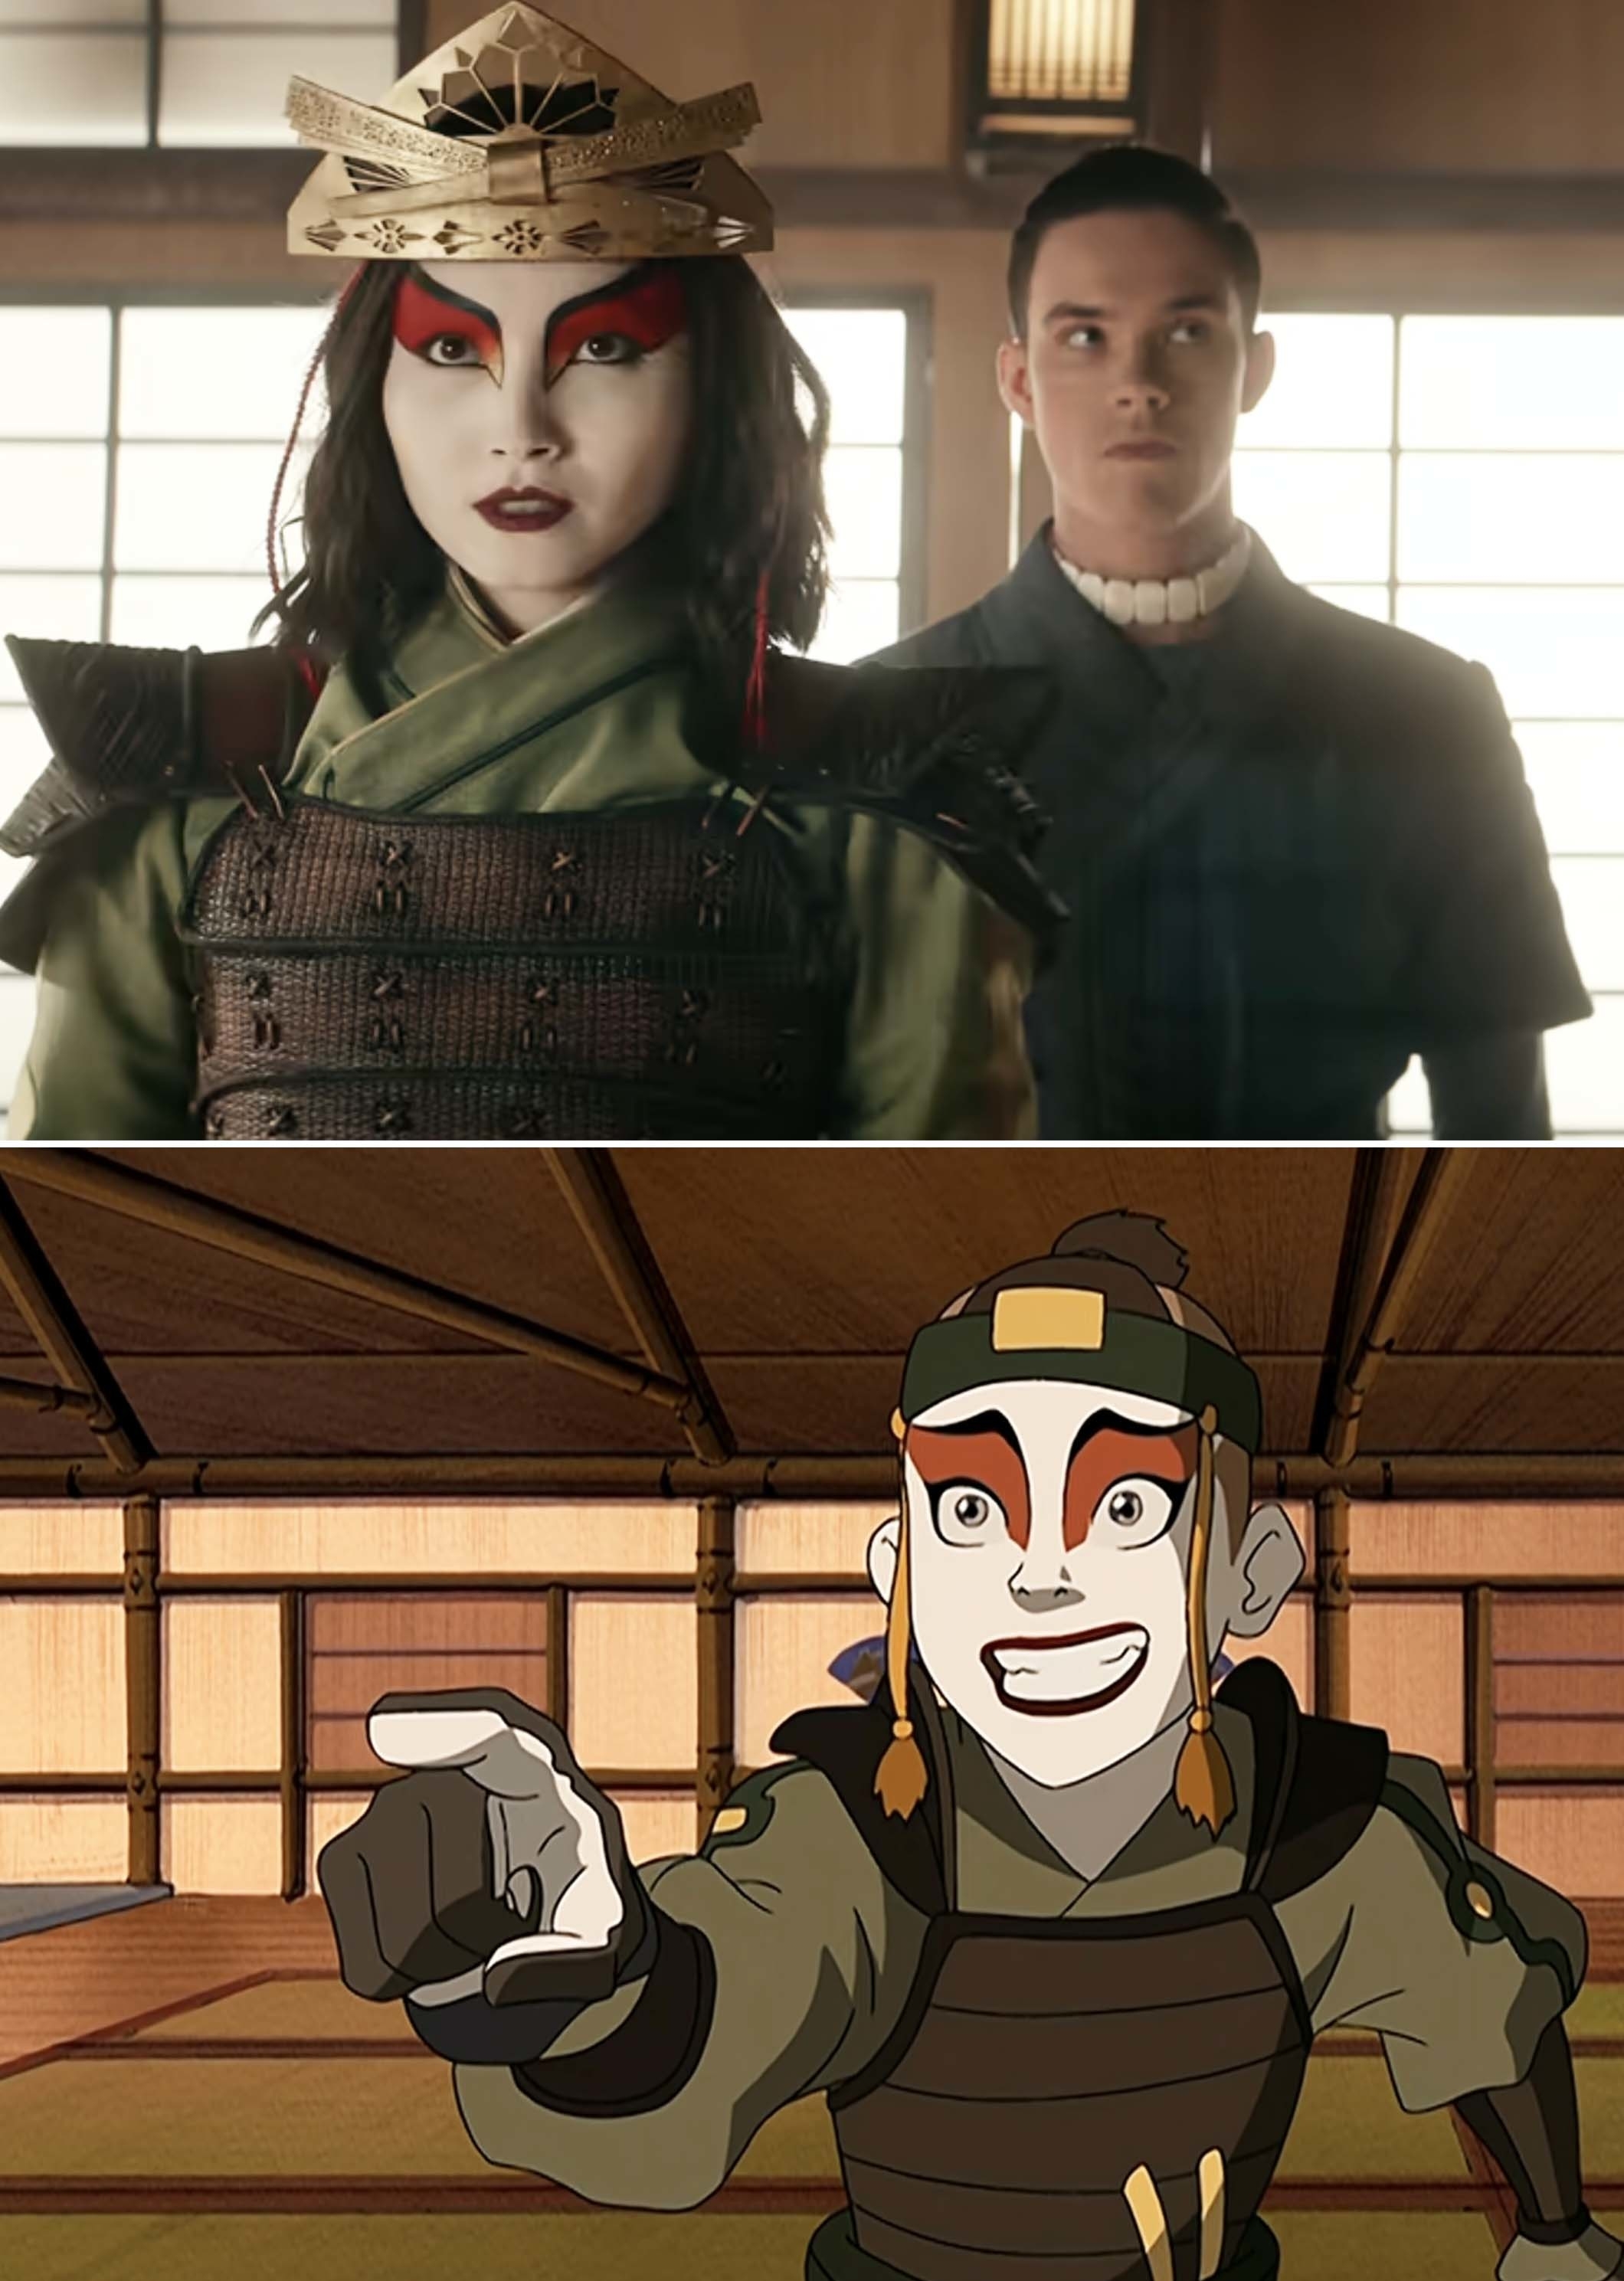 Two images: Top shows live-action characters, Kyoshi and Sokka. Bottom is animated Sokka, all dressed in traditional warrior outfits